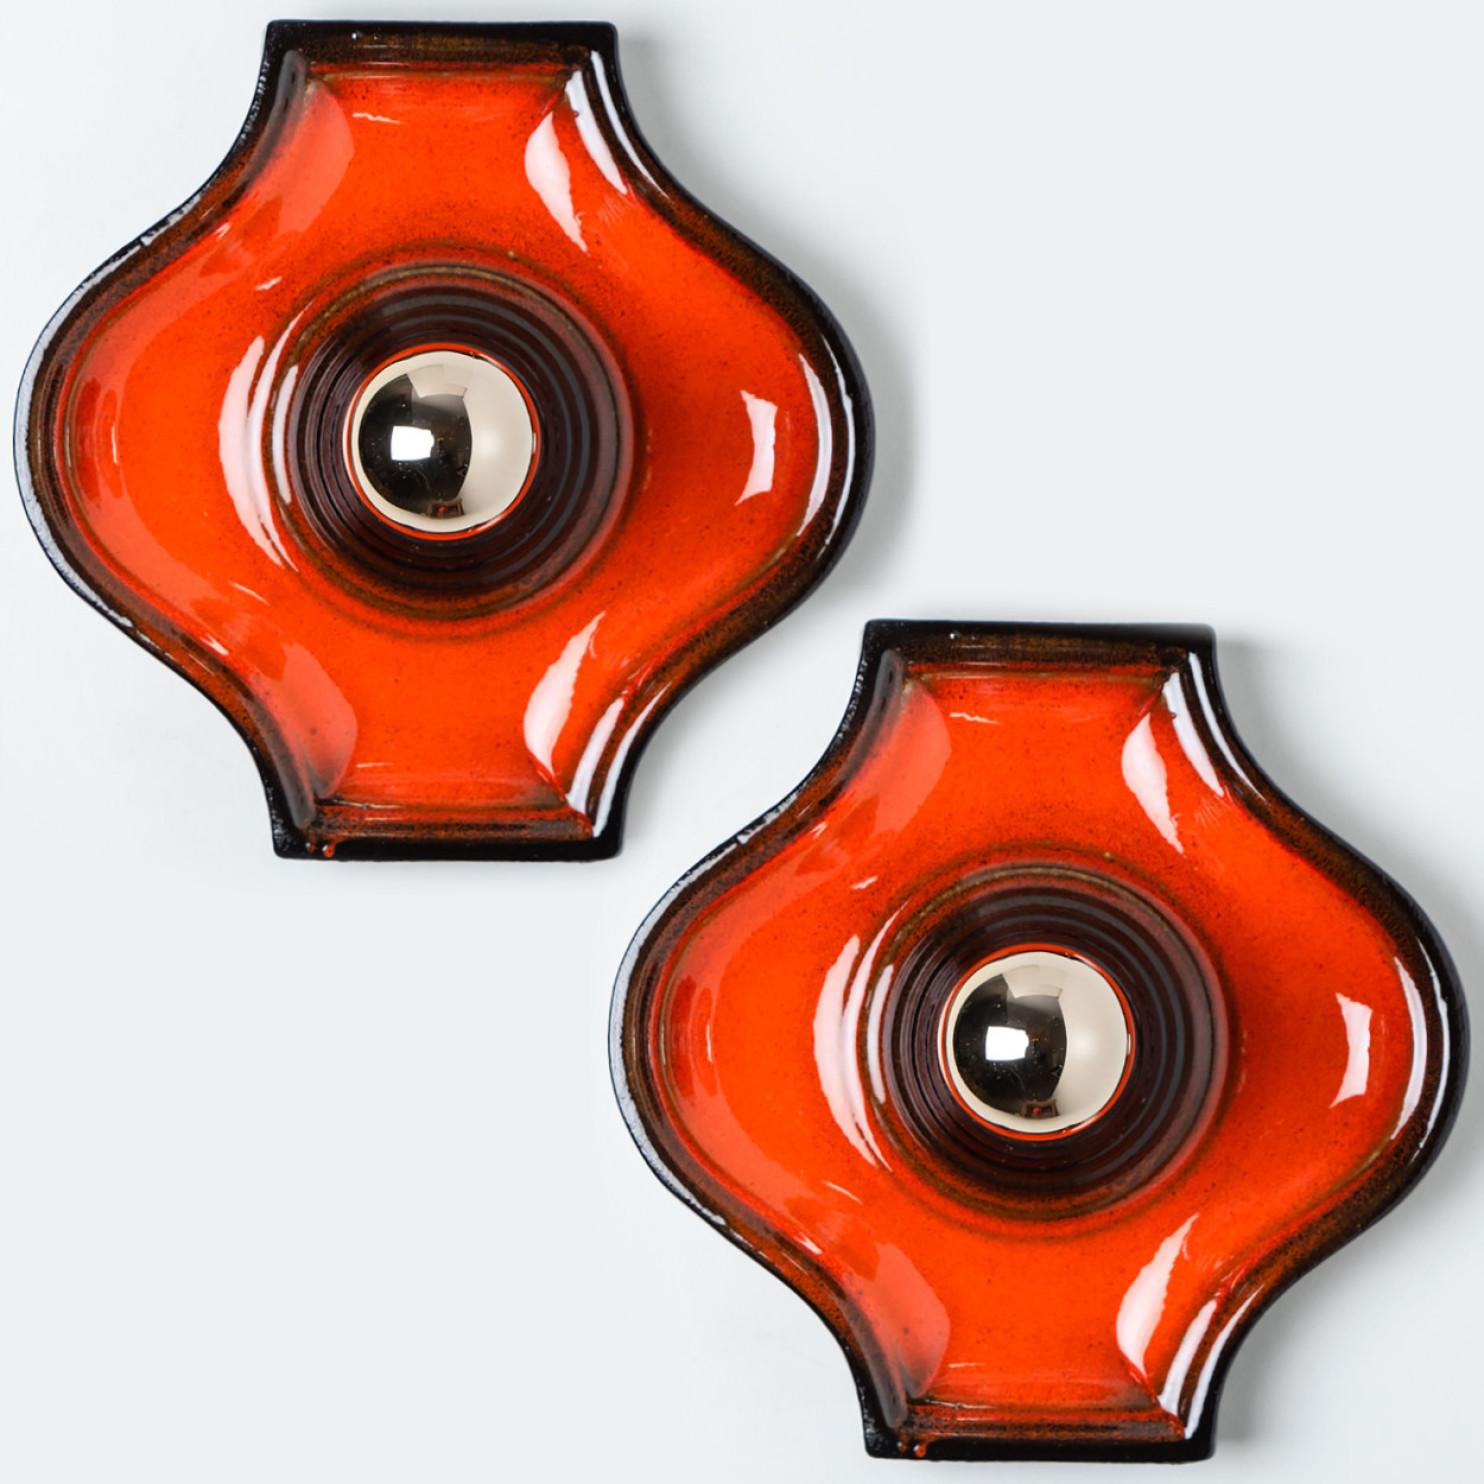 Ceramic wall light with orange glaze. Manufactured in West-Germany in the 1970's.

A typical way to finish ceramic in mid-century West-Germany, Europe.

Please note the price is for the set of 2. Each light requires one E27 light bulb.

